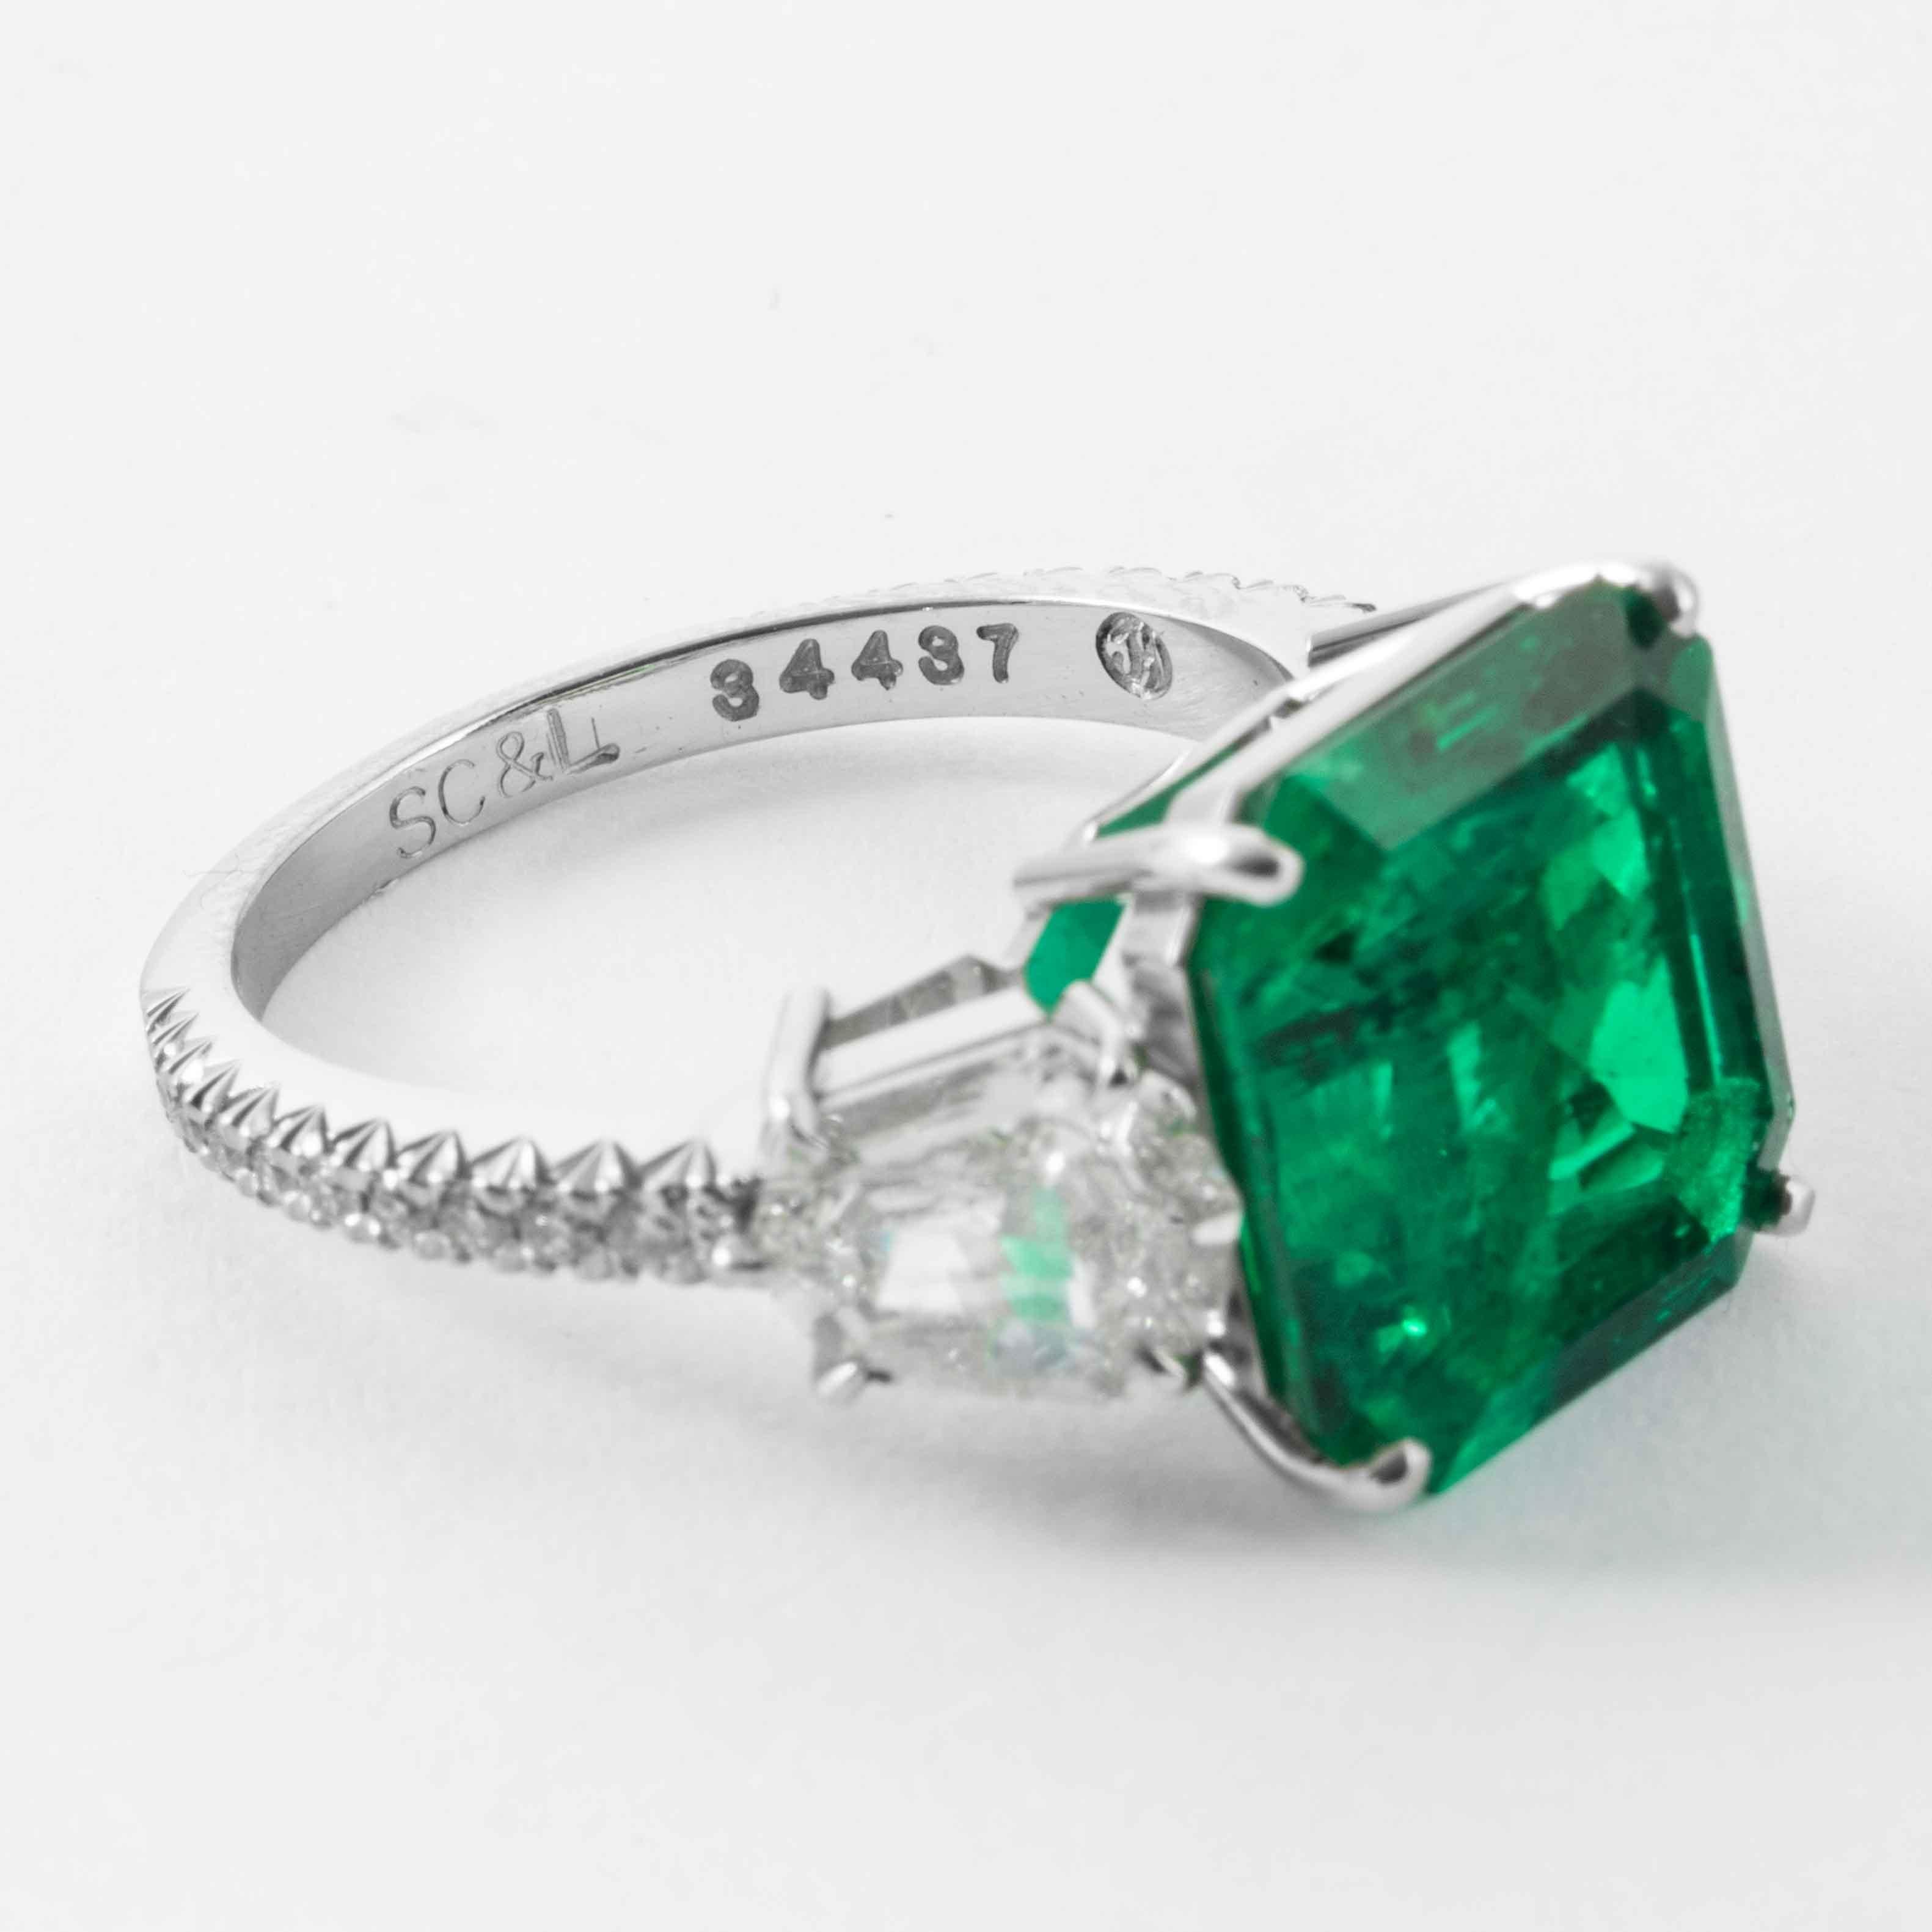 Women's Shreve, Crump & Low 5.48 Carat Colombian Emerald and Diamond White Gold Ring For Sale